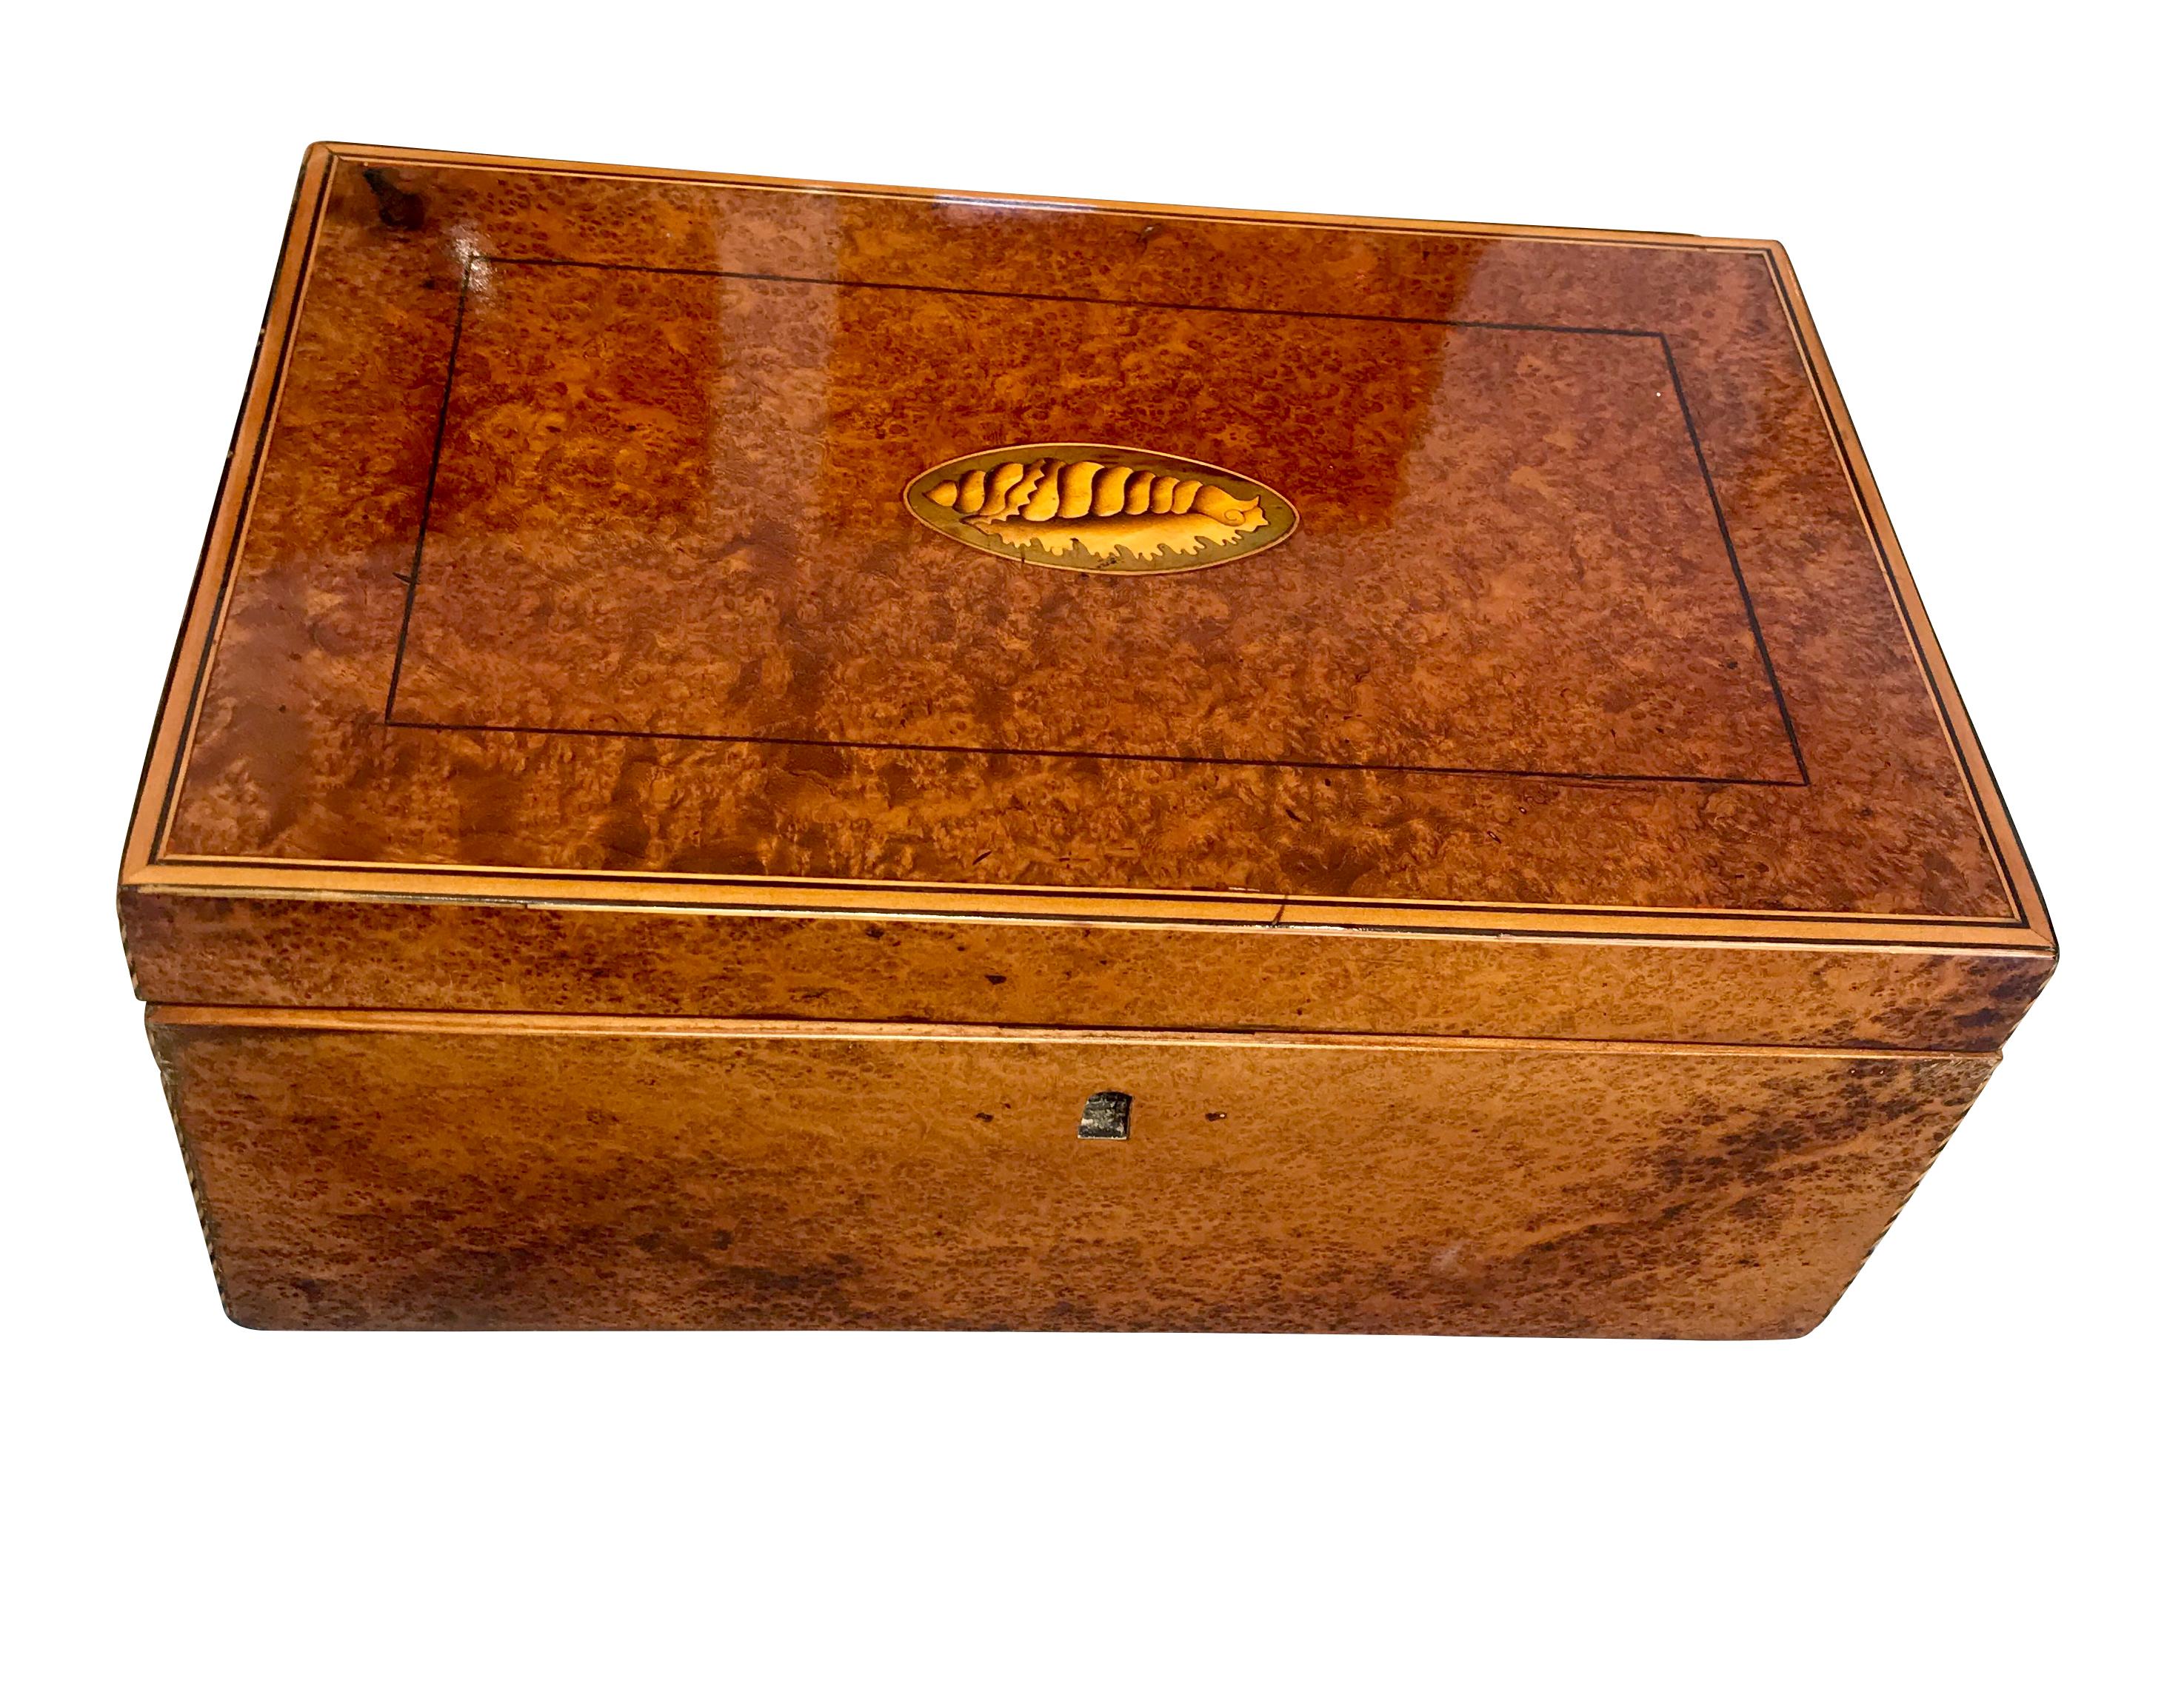 Beautiful french Biedermeier casket/box and from precious Tuia roots veneer from circa 1840.

On the top cover it has a nice mussels inlay motif made from and maple and ebony. 

The box has been hand-polished with shellac and is in great restored